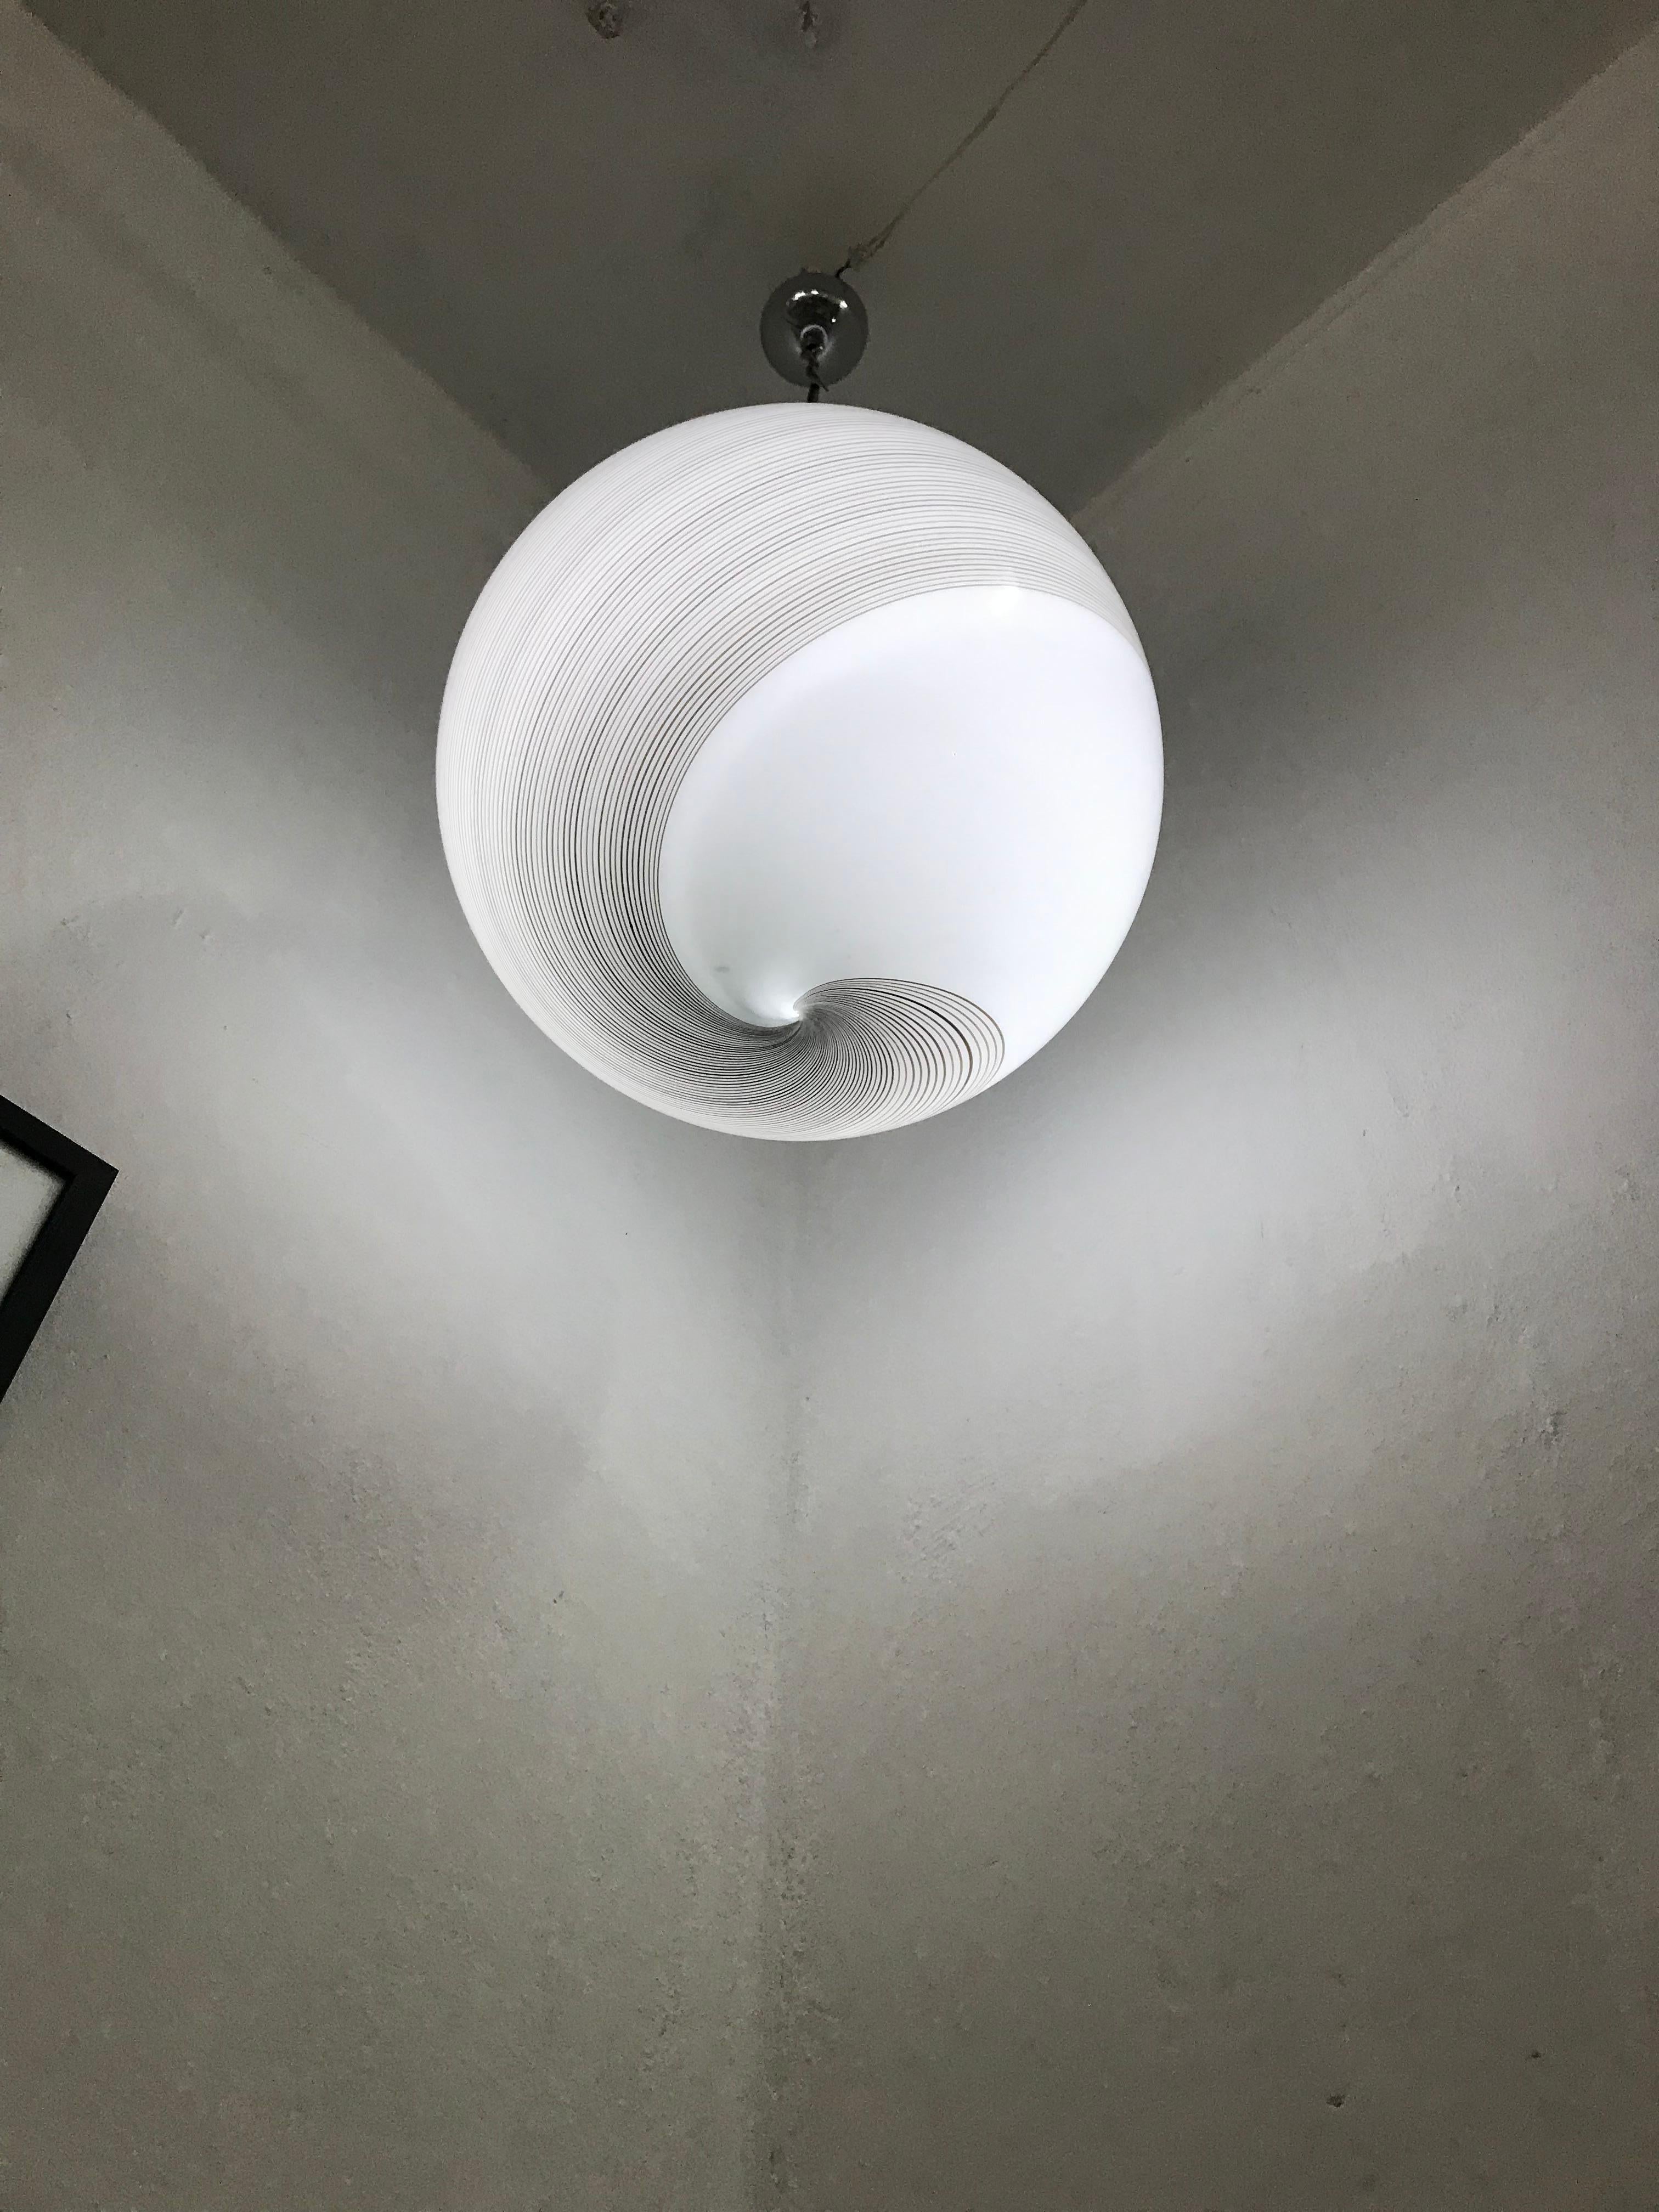 Large Mid-Century Modern Sphere Chandelier in Murano Glass by Venini, circa 1970 In Good Condition For Sale In Merida, Yucatan